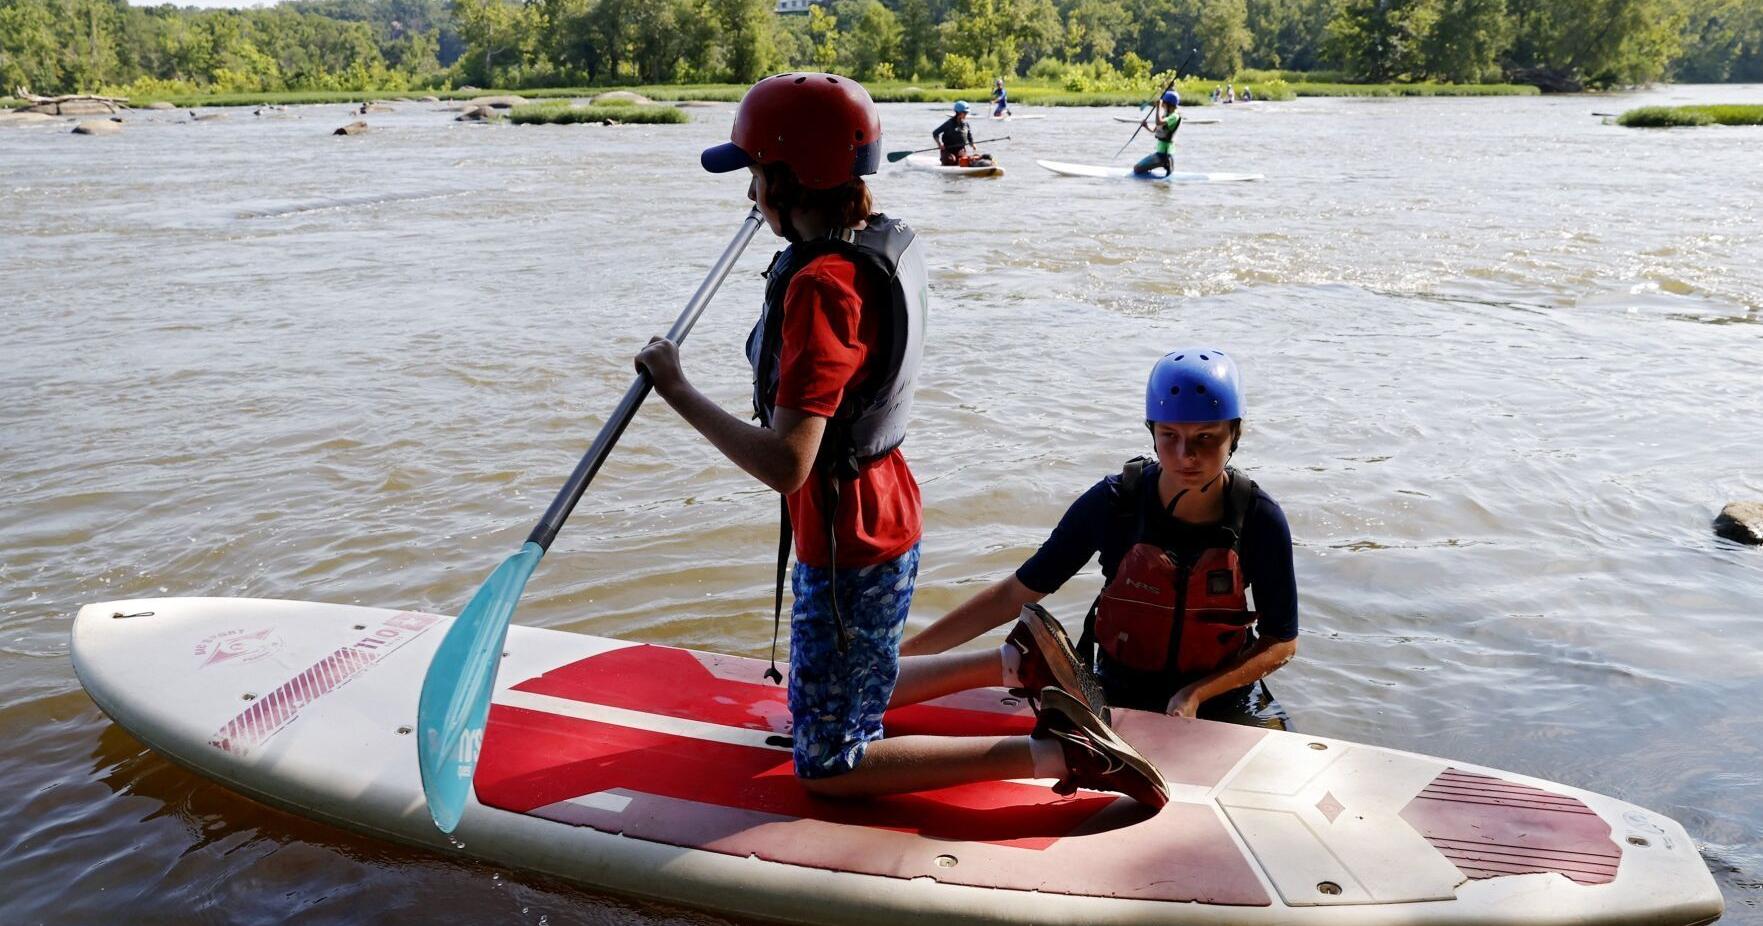 Richmond's outdoor community bands together to keep river users safe